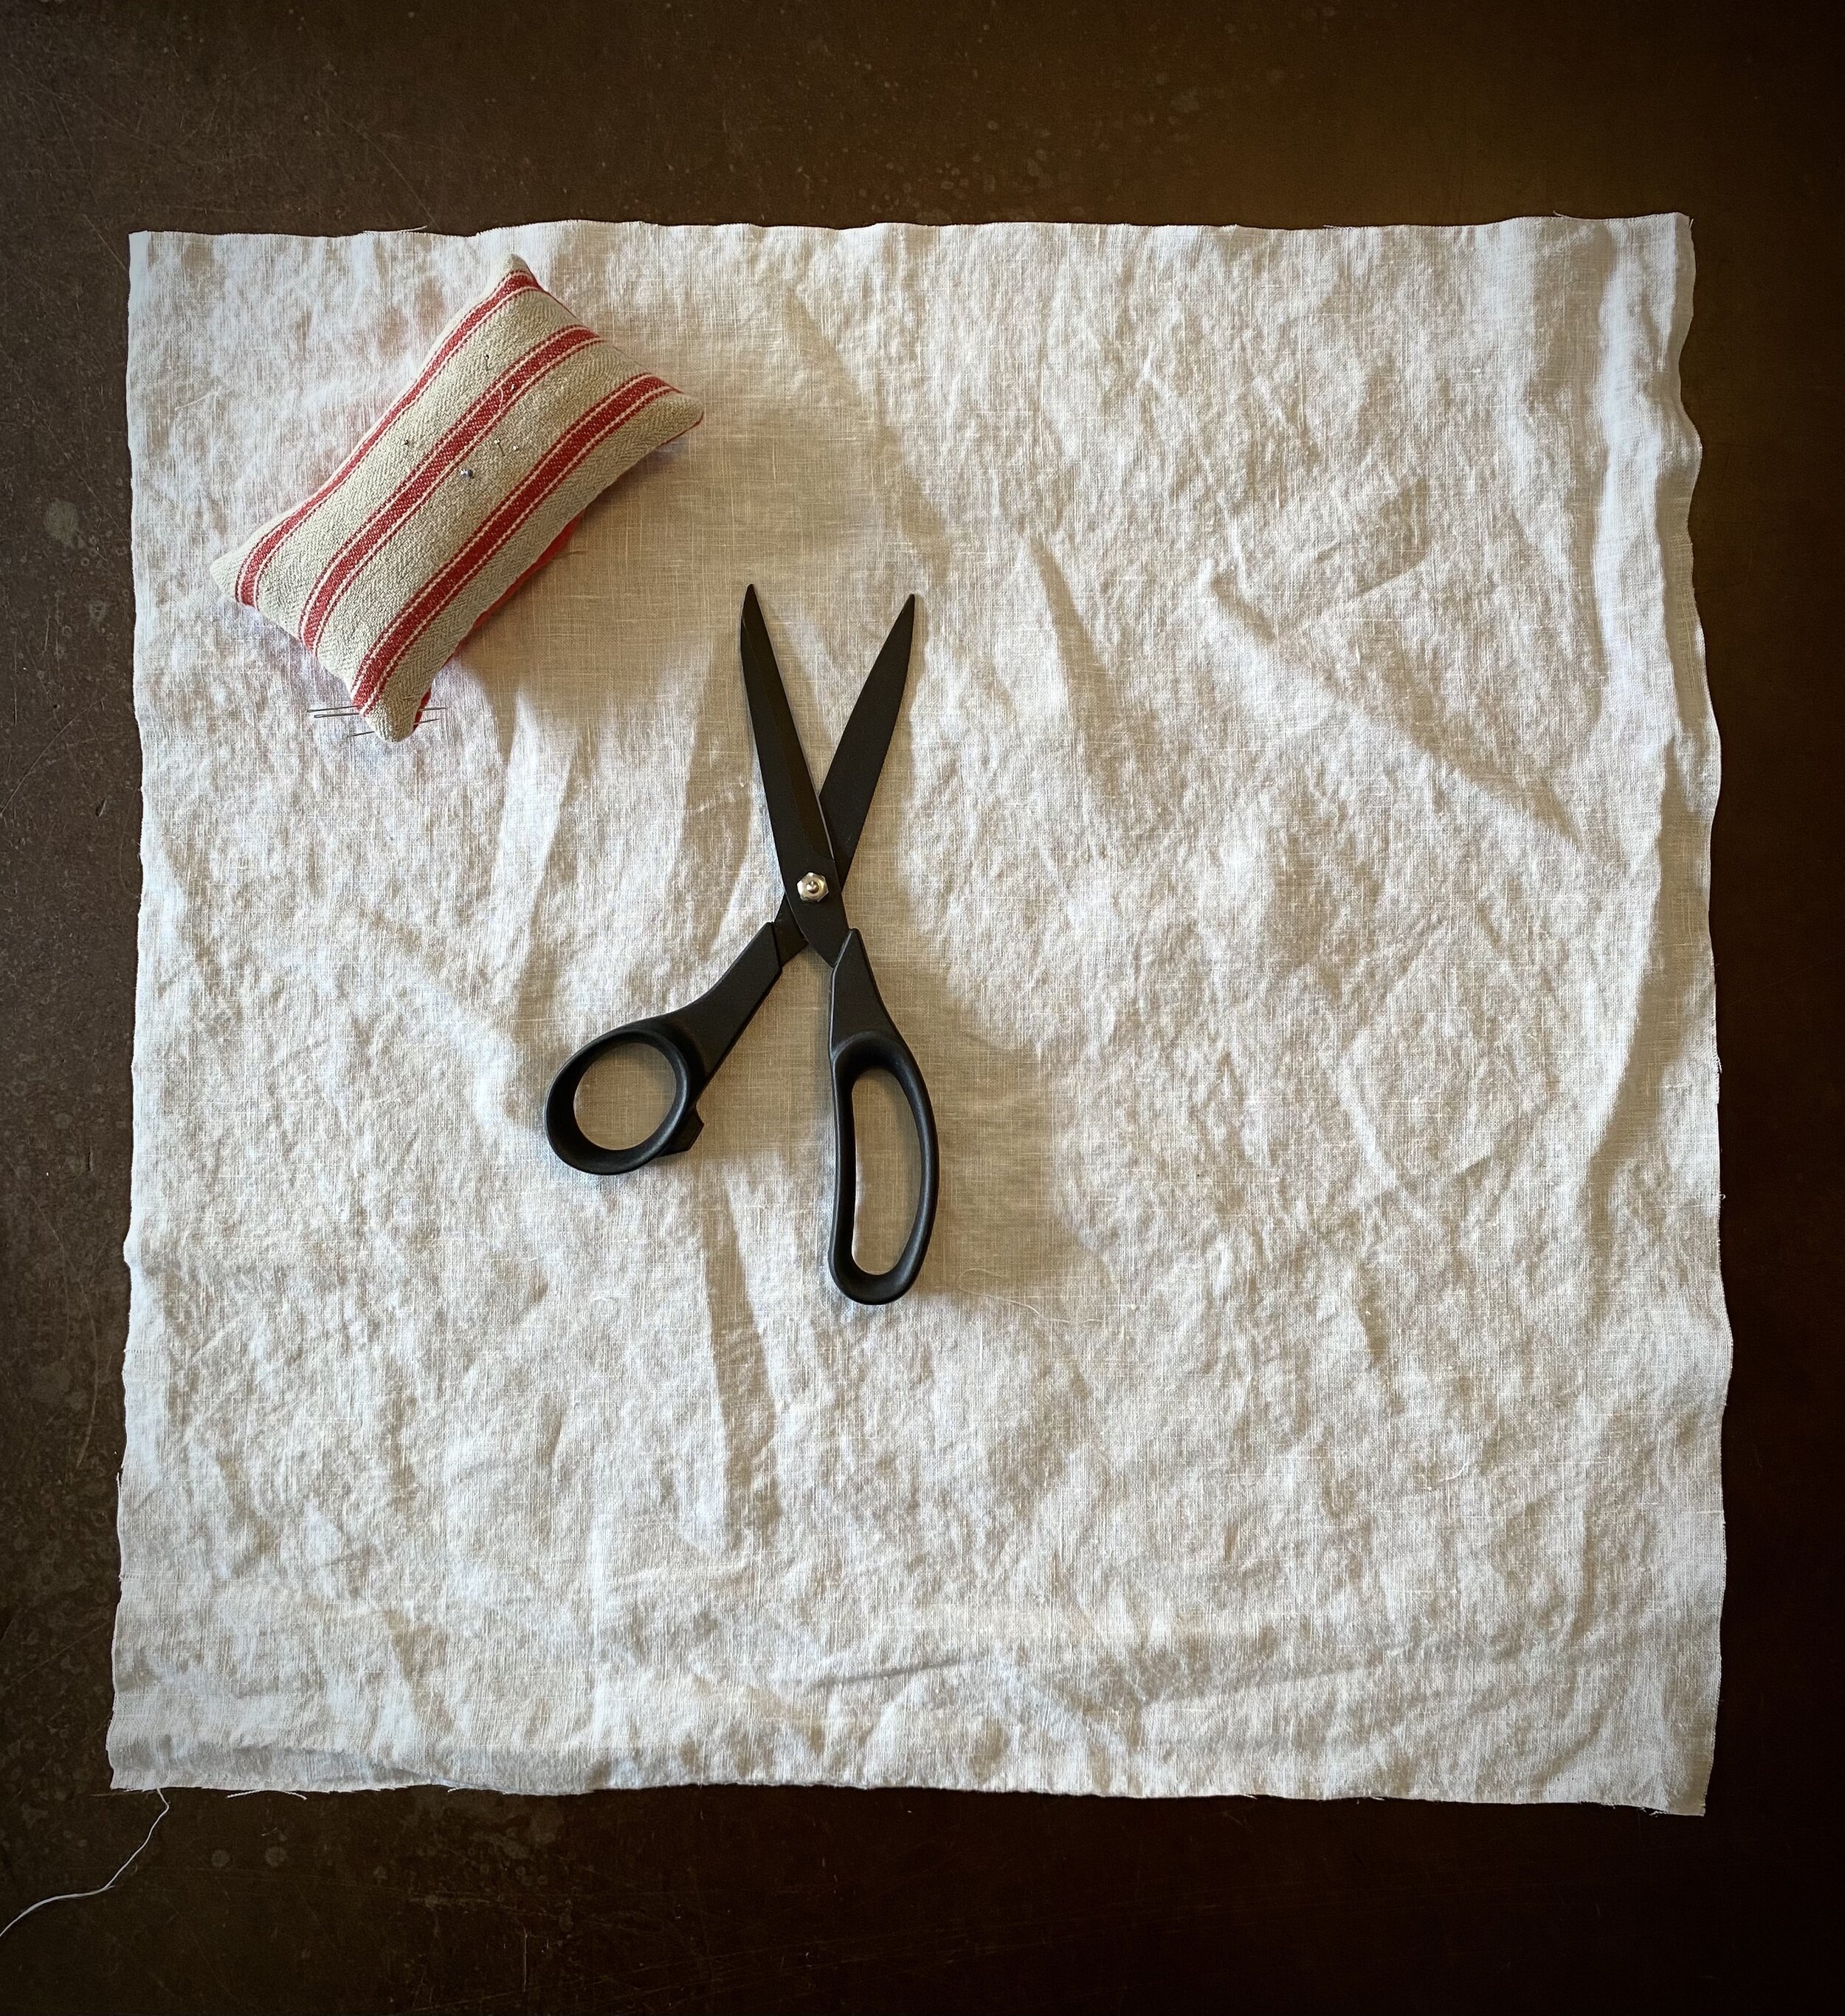 Make Your Own Linen Napkins - Sewing DIY! — CONNIE AND LUNA